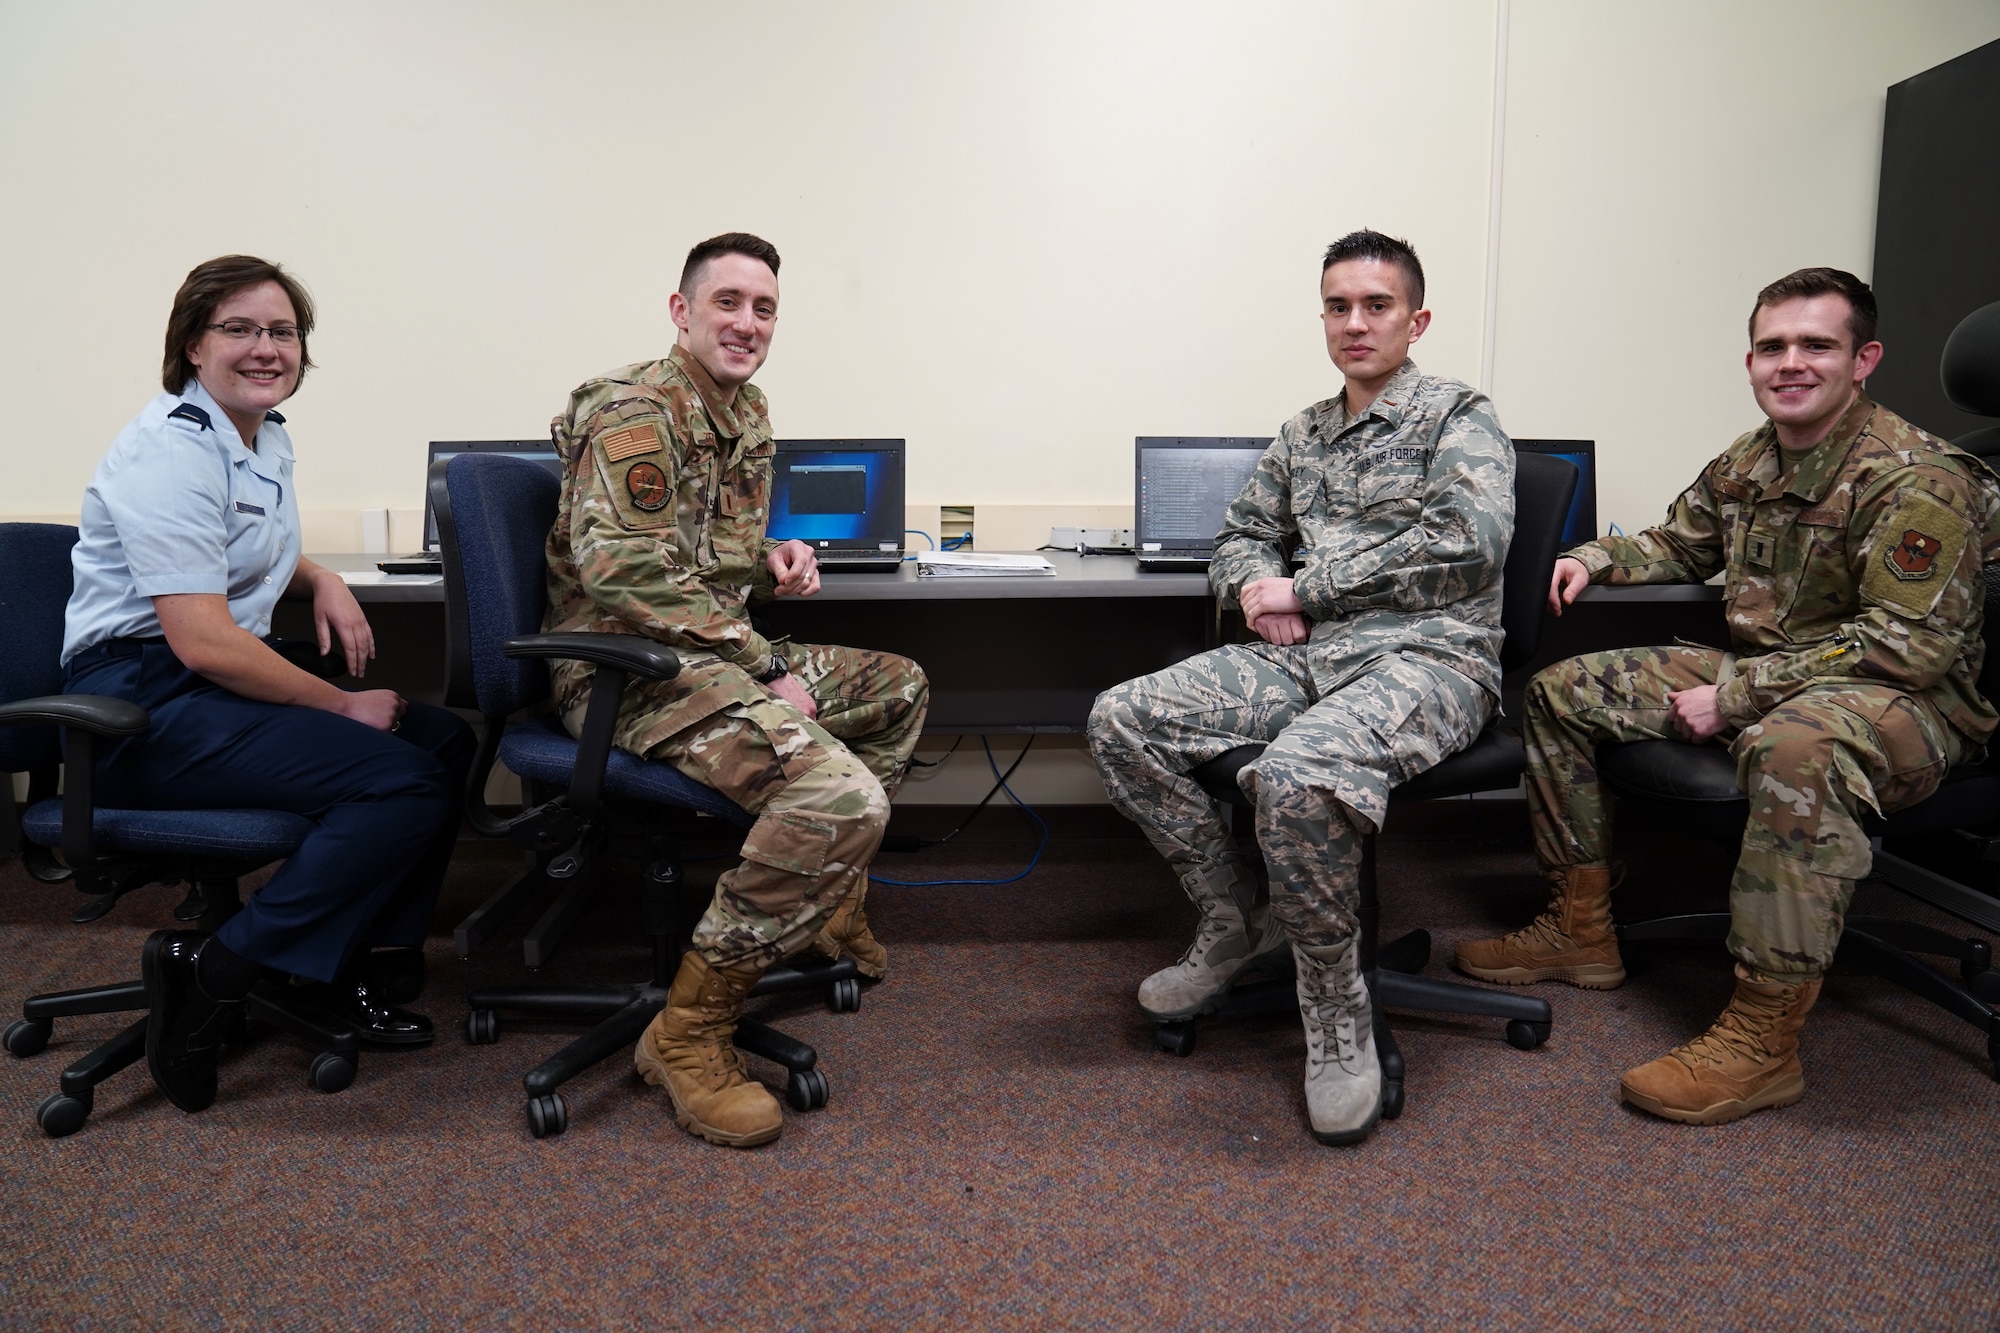 U.S. Air Force Airmen, President's Cybersecurity Cup competition team, pose for a photo inside Stennis Hall at Keesler Air Force Base, Dec. 12, 2019. The competition was initiated by President Donald Trump to strengthen cybersecurity across the nation and Department of Defense. (U.S. Air Force photo by Airman Seth Haddix)